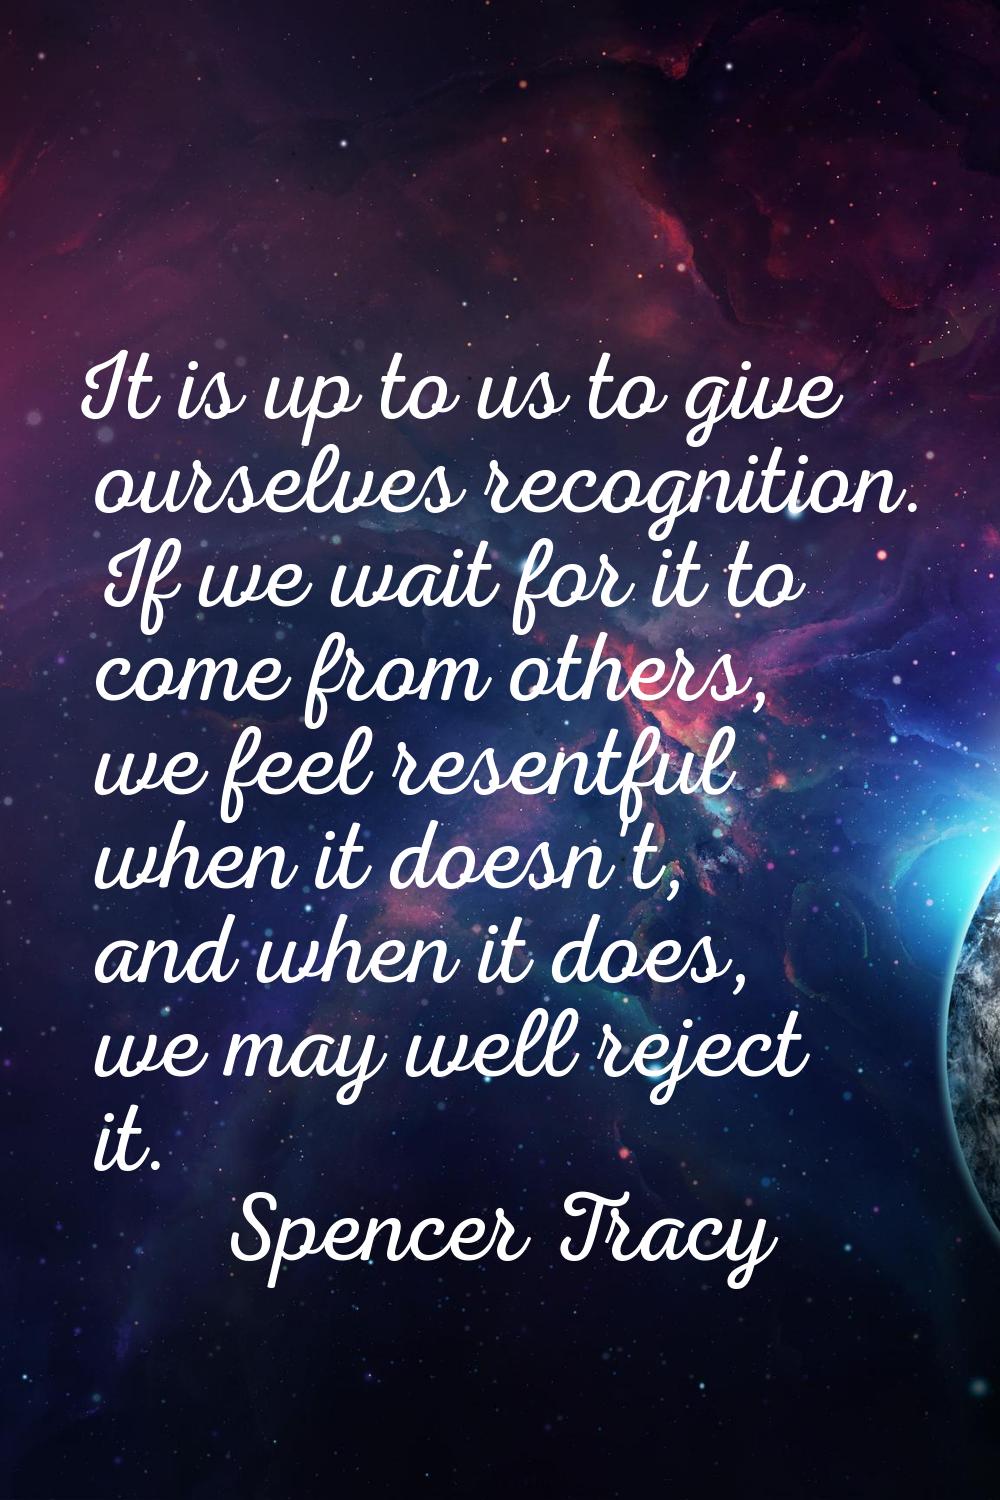 It is up to us to give ourselves recognition. If we wait for it to come from others, we feel resent